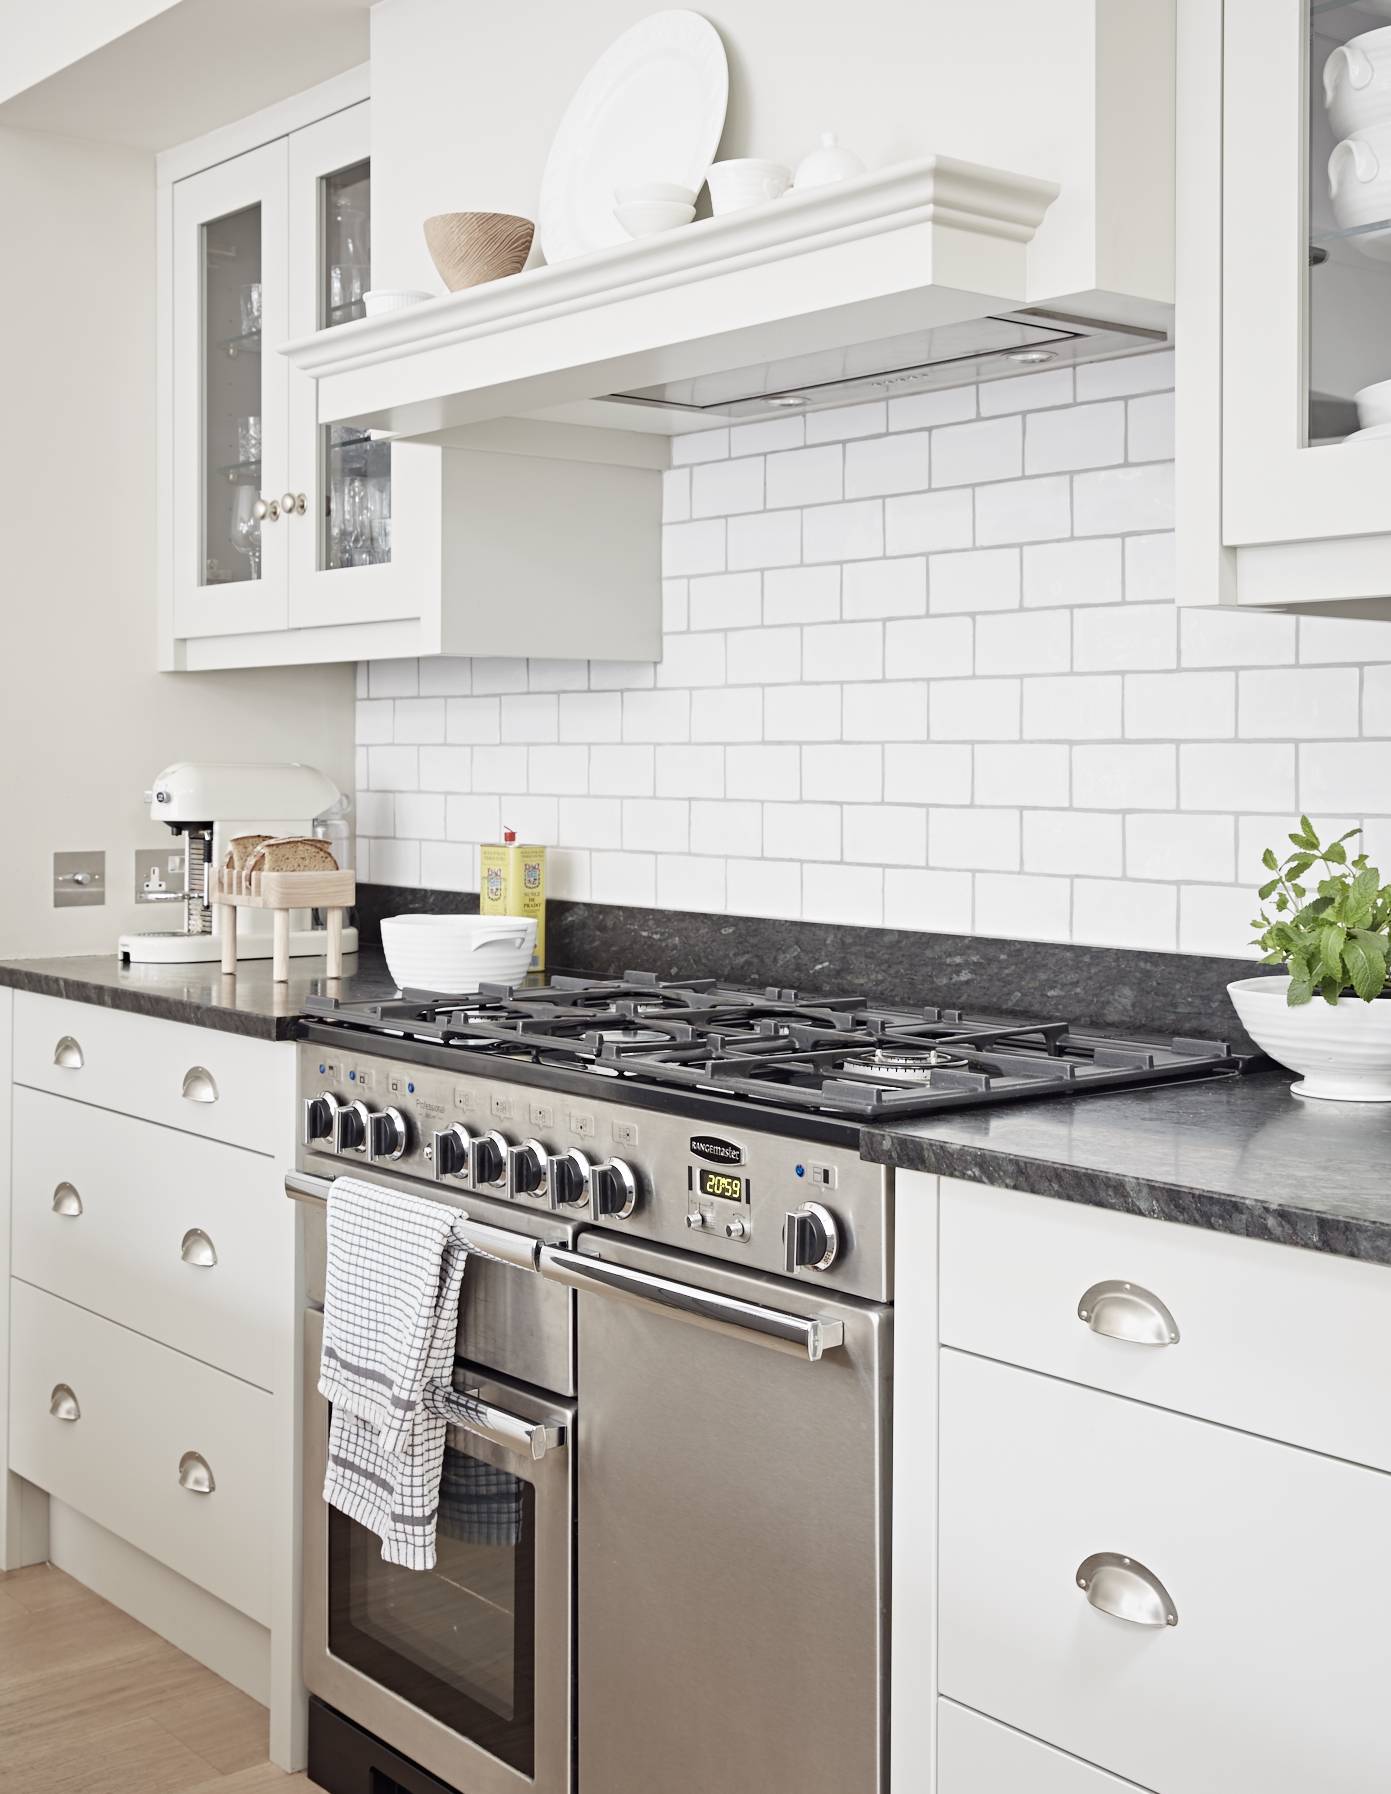 John Lewis of Hungerford luxury Shaker kitchen in white and grey with integrated cooker